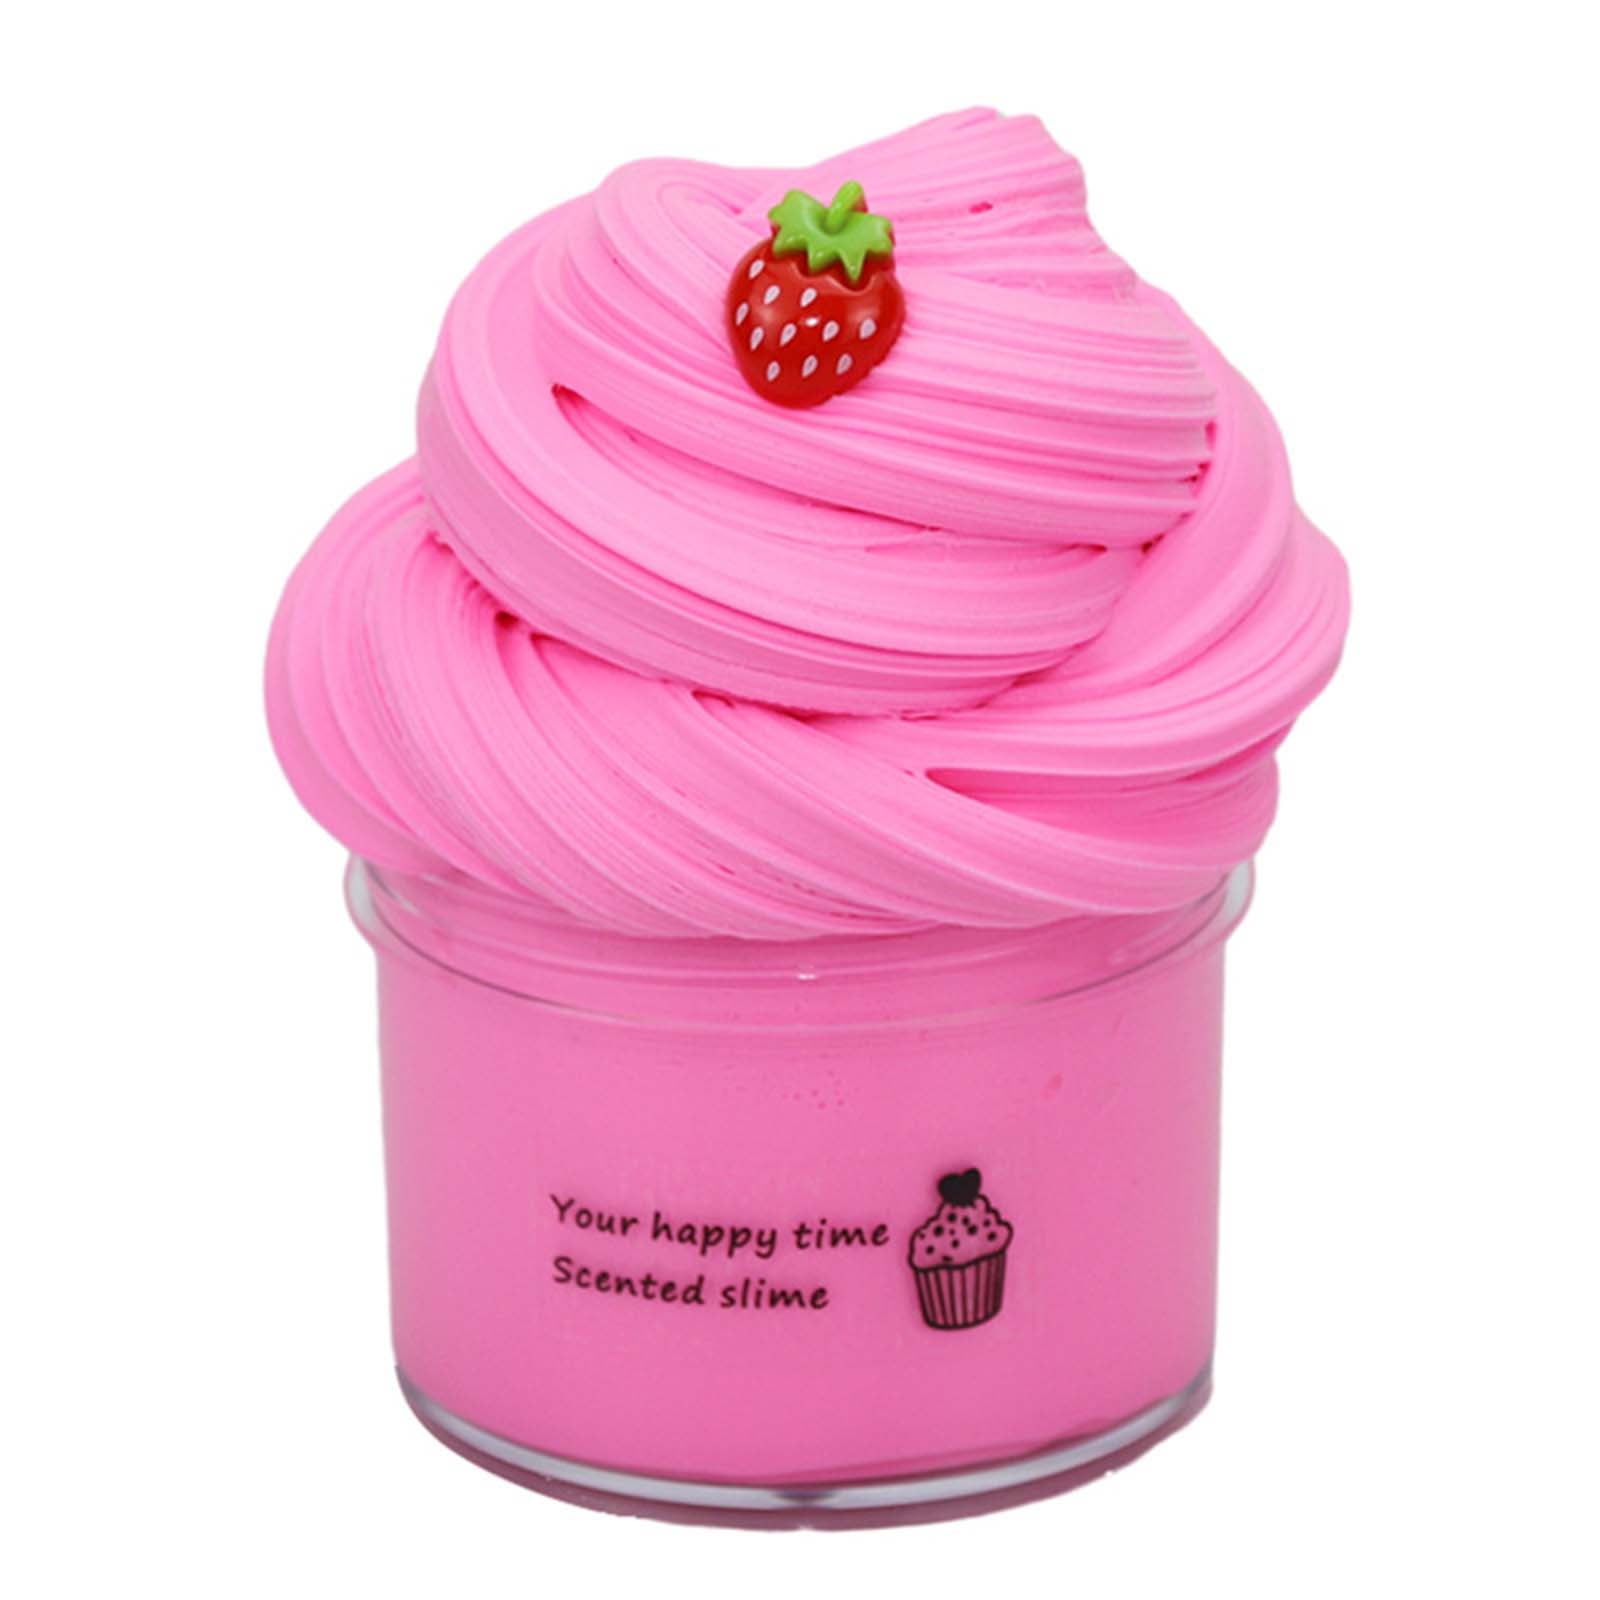 GirlZone Sweet Treats Butter Slime Bakery Kit, Everything in One Egg to Make Scented Slime, Slime Butter and Birthday Cake Scented Slime in One Butter